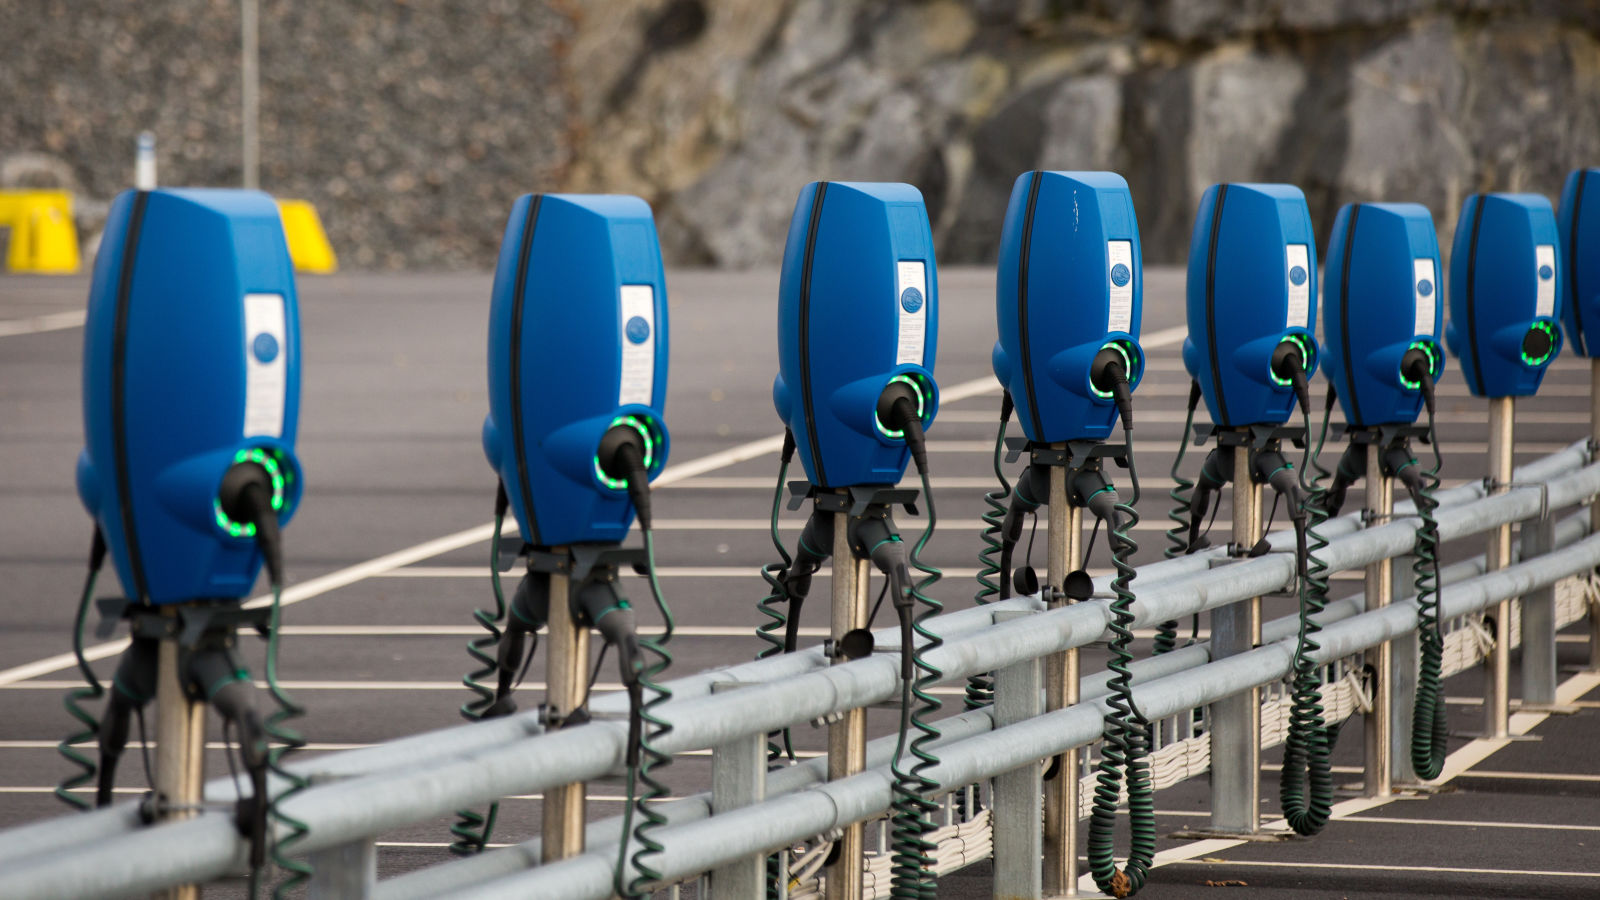 How to Find a Compatible Electric Car Charging Station Using Google